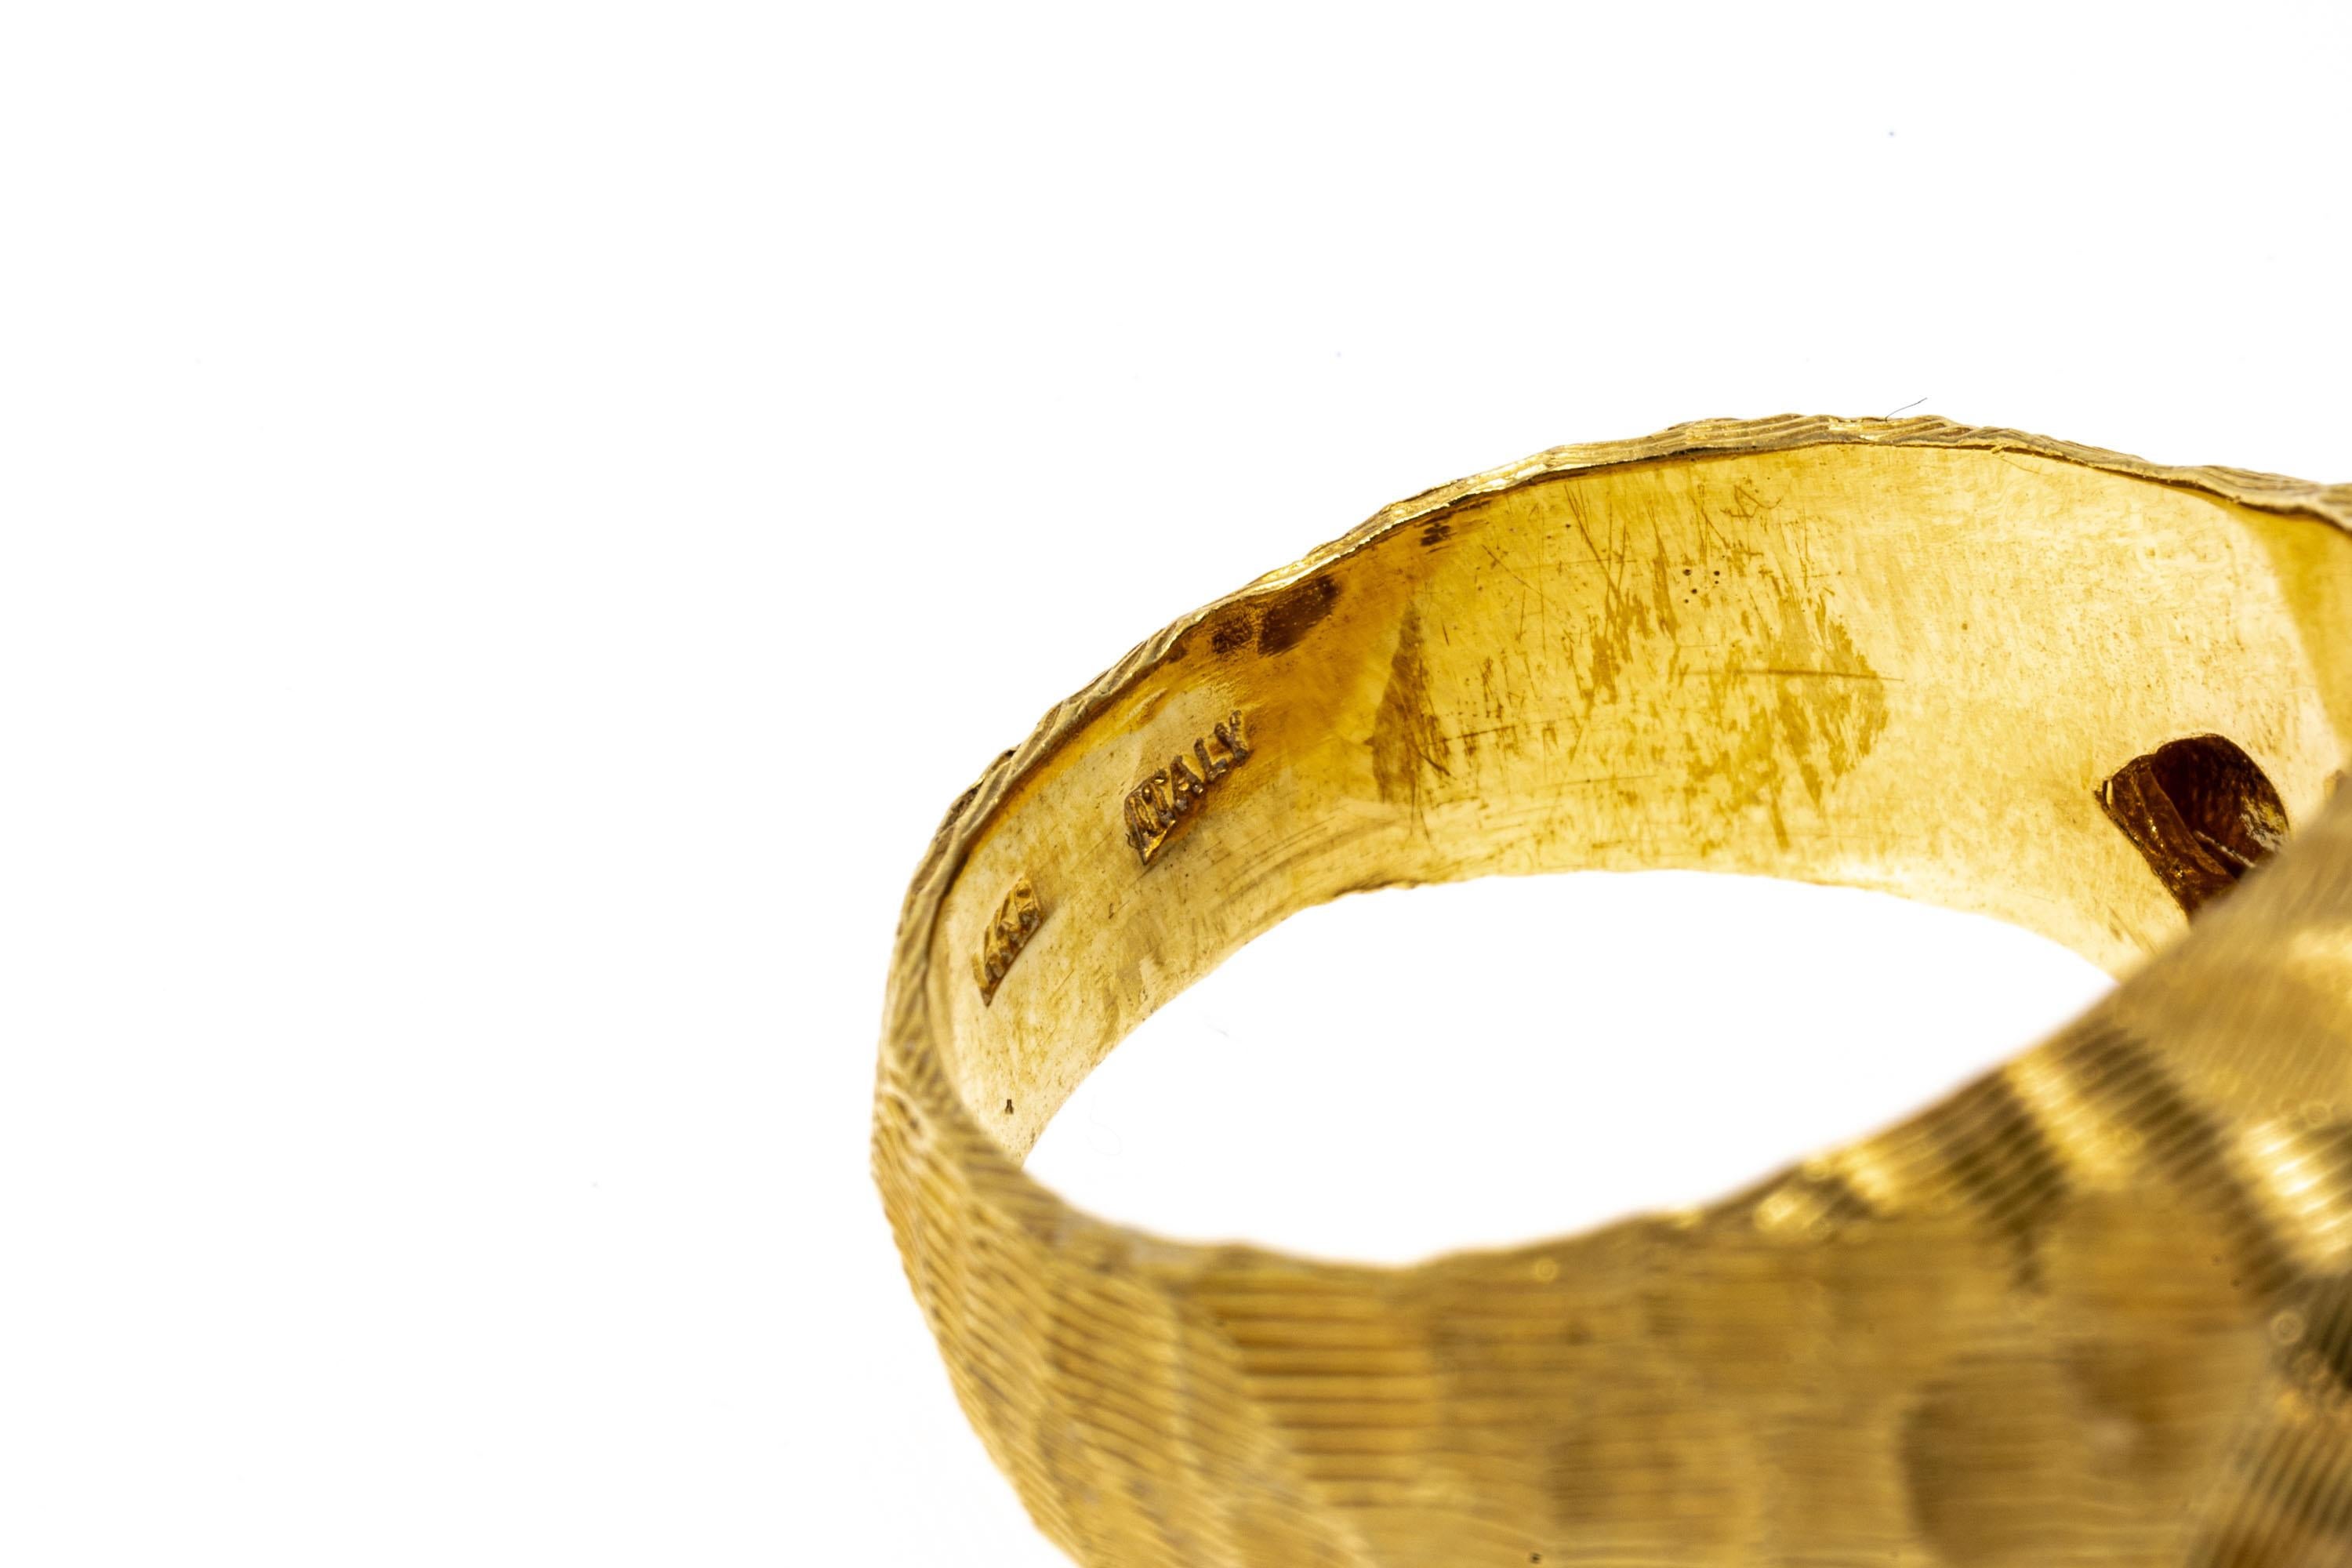 14k yellow gold ring. This unusual yellow gold ring is a free form, slightly concave profile, with a hammered style patterning and decorated with a fine, grooved pattern throughout, including the shoulders and shank.
Marks: 14k
Dimensions: 3/4